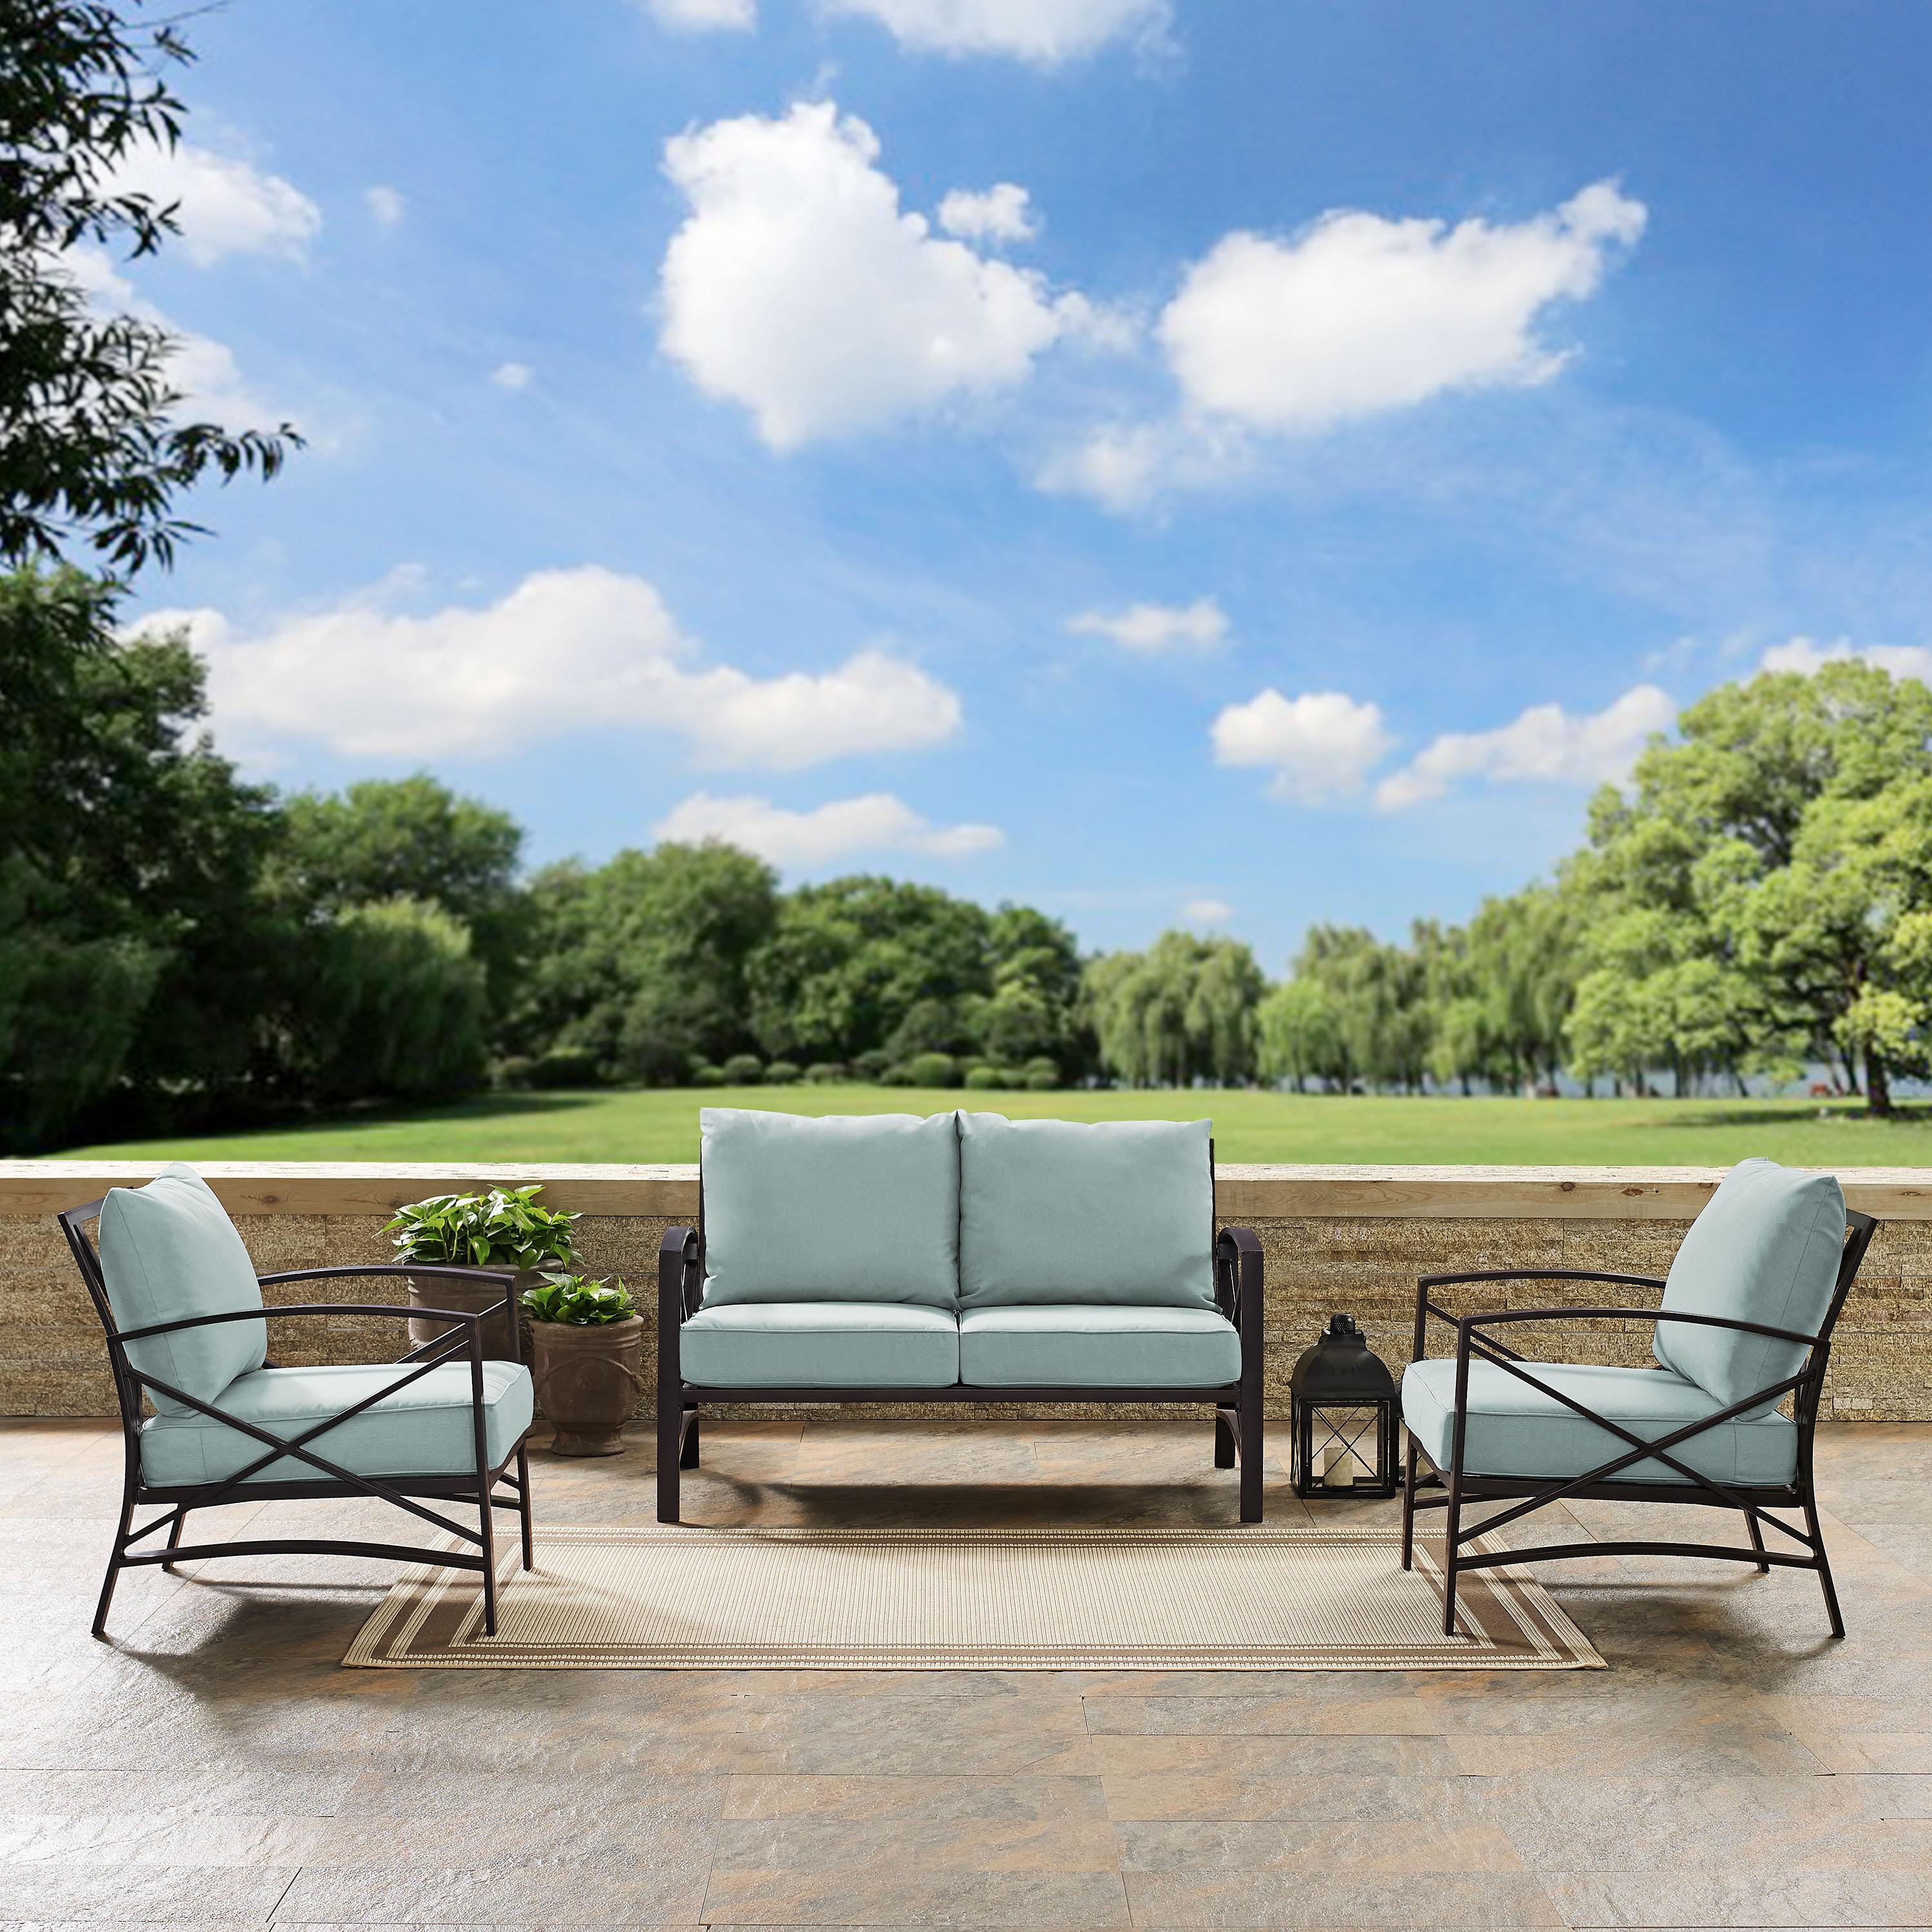 Crosley Furniture Kaplan 3 Pc Outdoor Seating Set With Mist Cushion - Loveseat, Two Outdoor Chairs - image 2 of 8